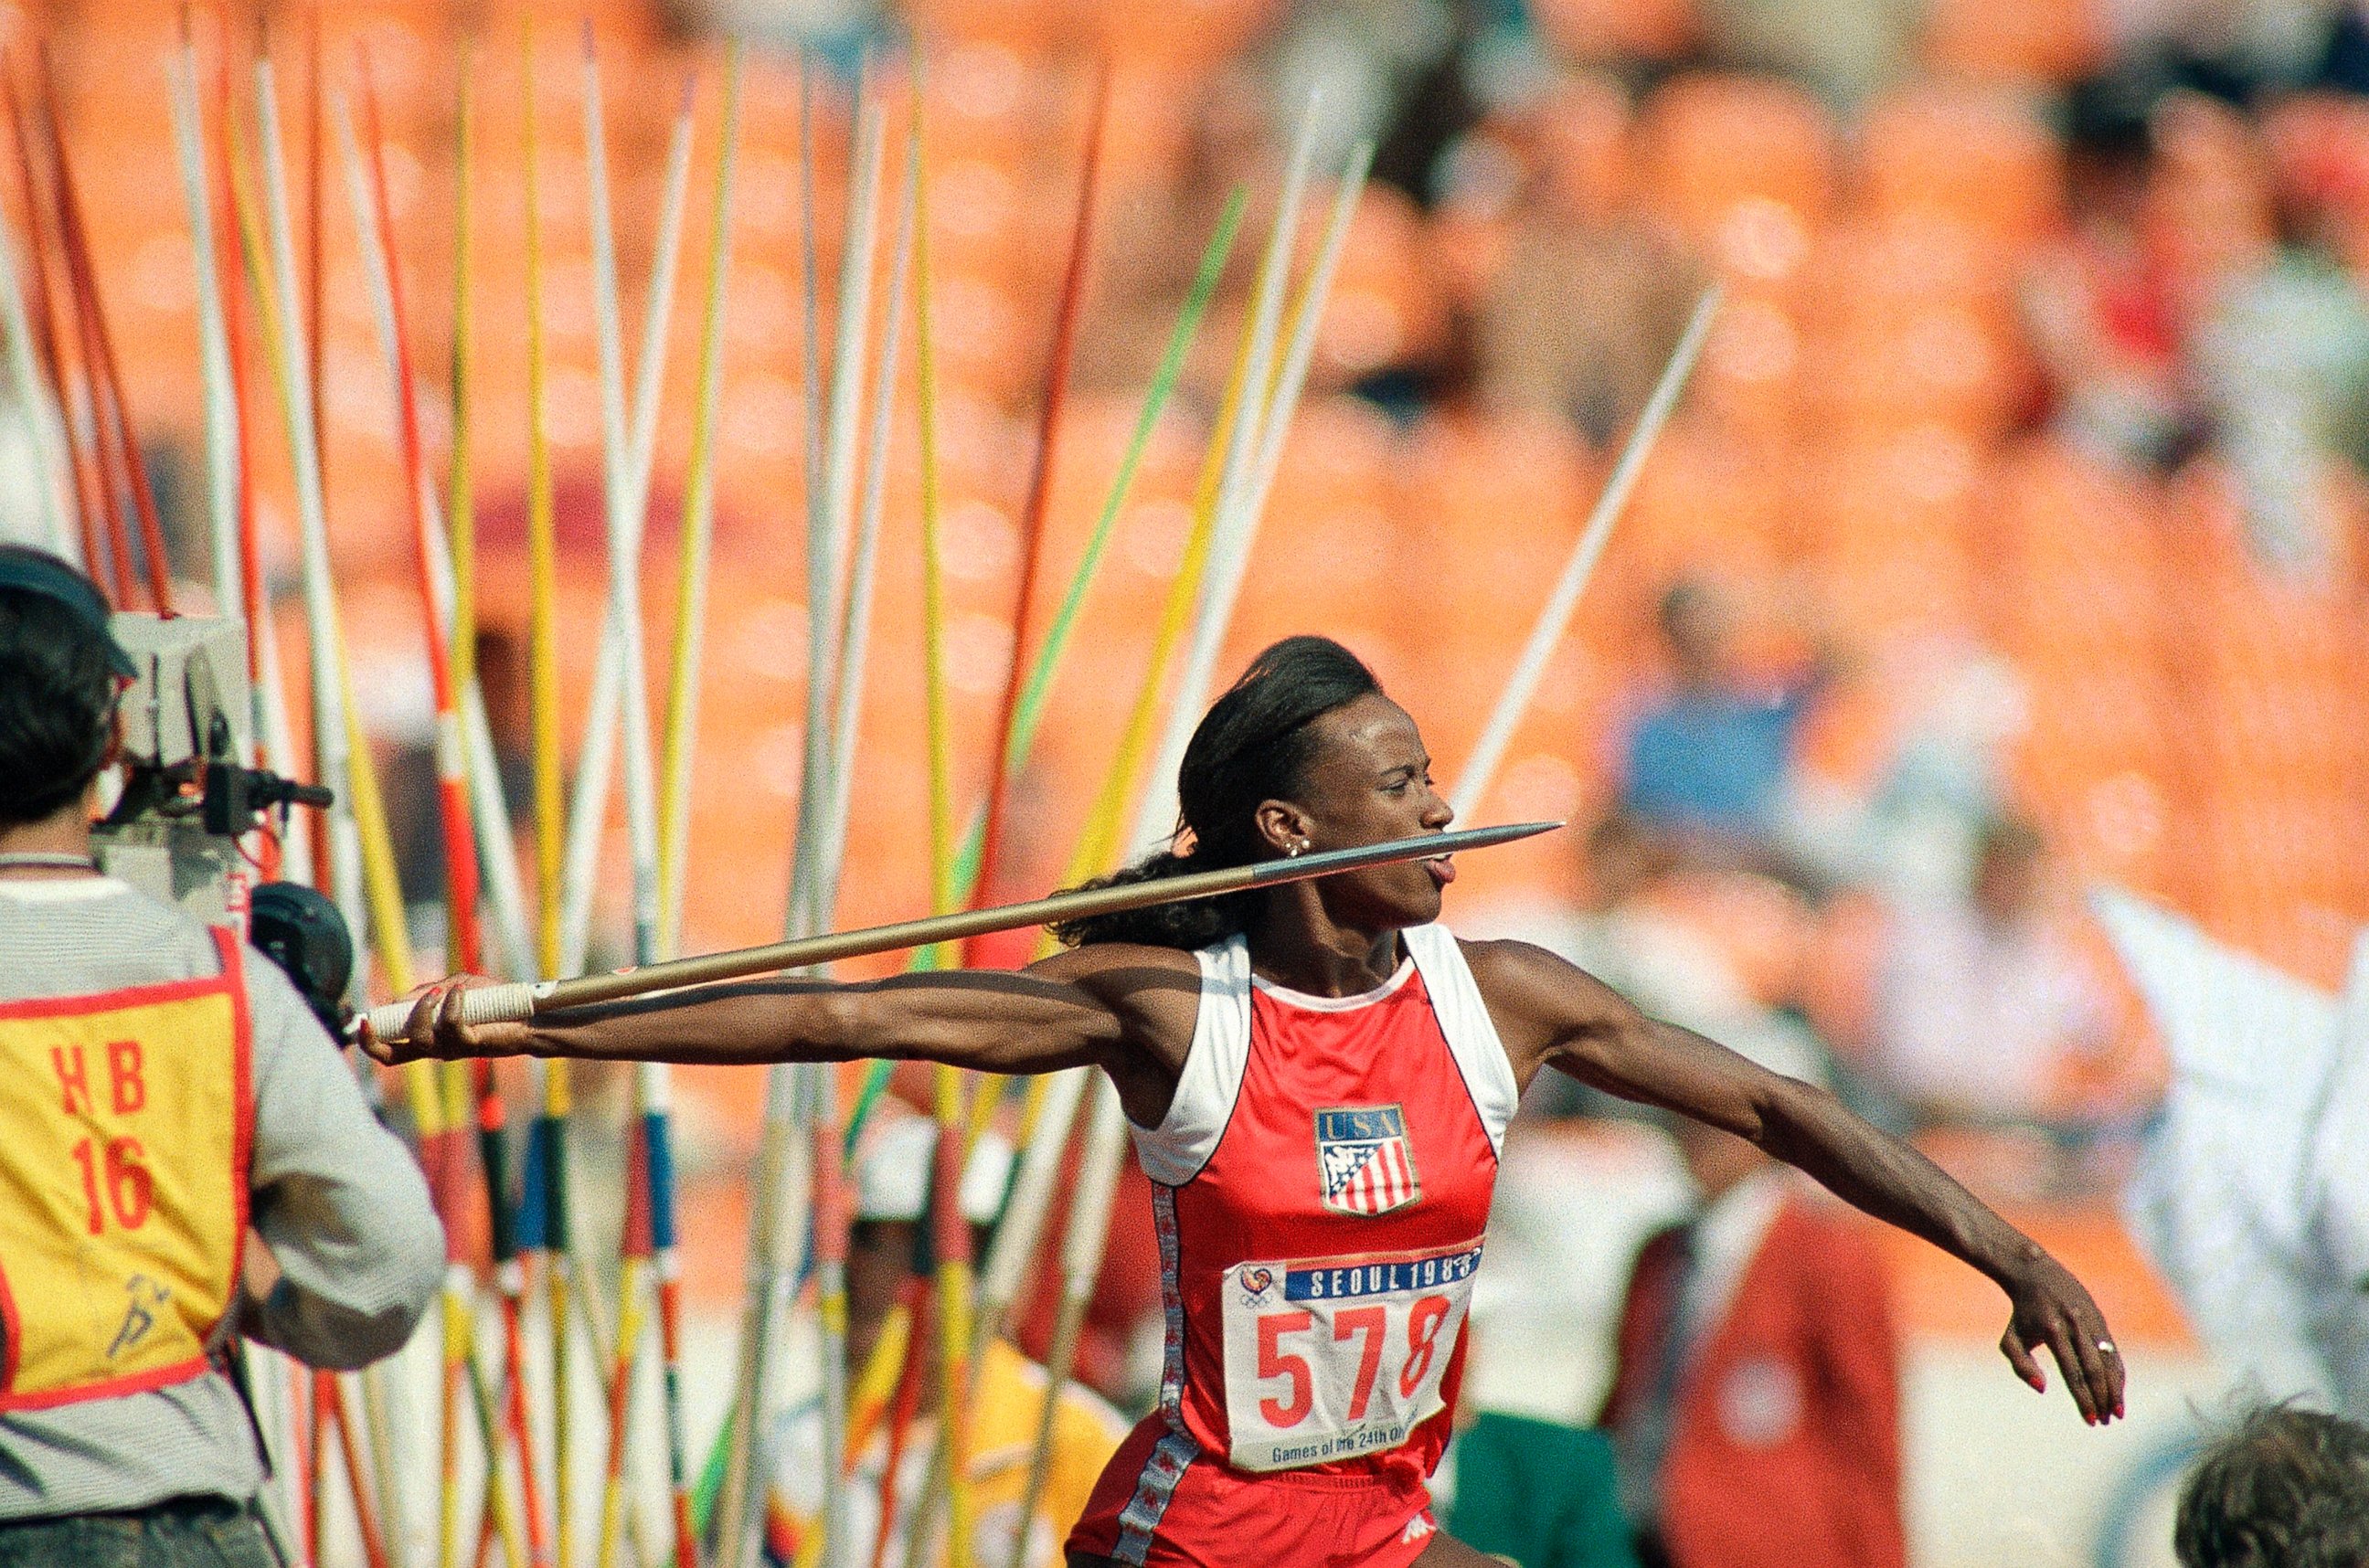 PHOTO: Jackie Joyner-Kersee makes her javelin throw during the heptathlon competition at the Seoul Olympics, Sept. 24, 1988. 